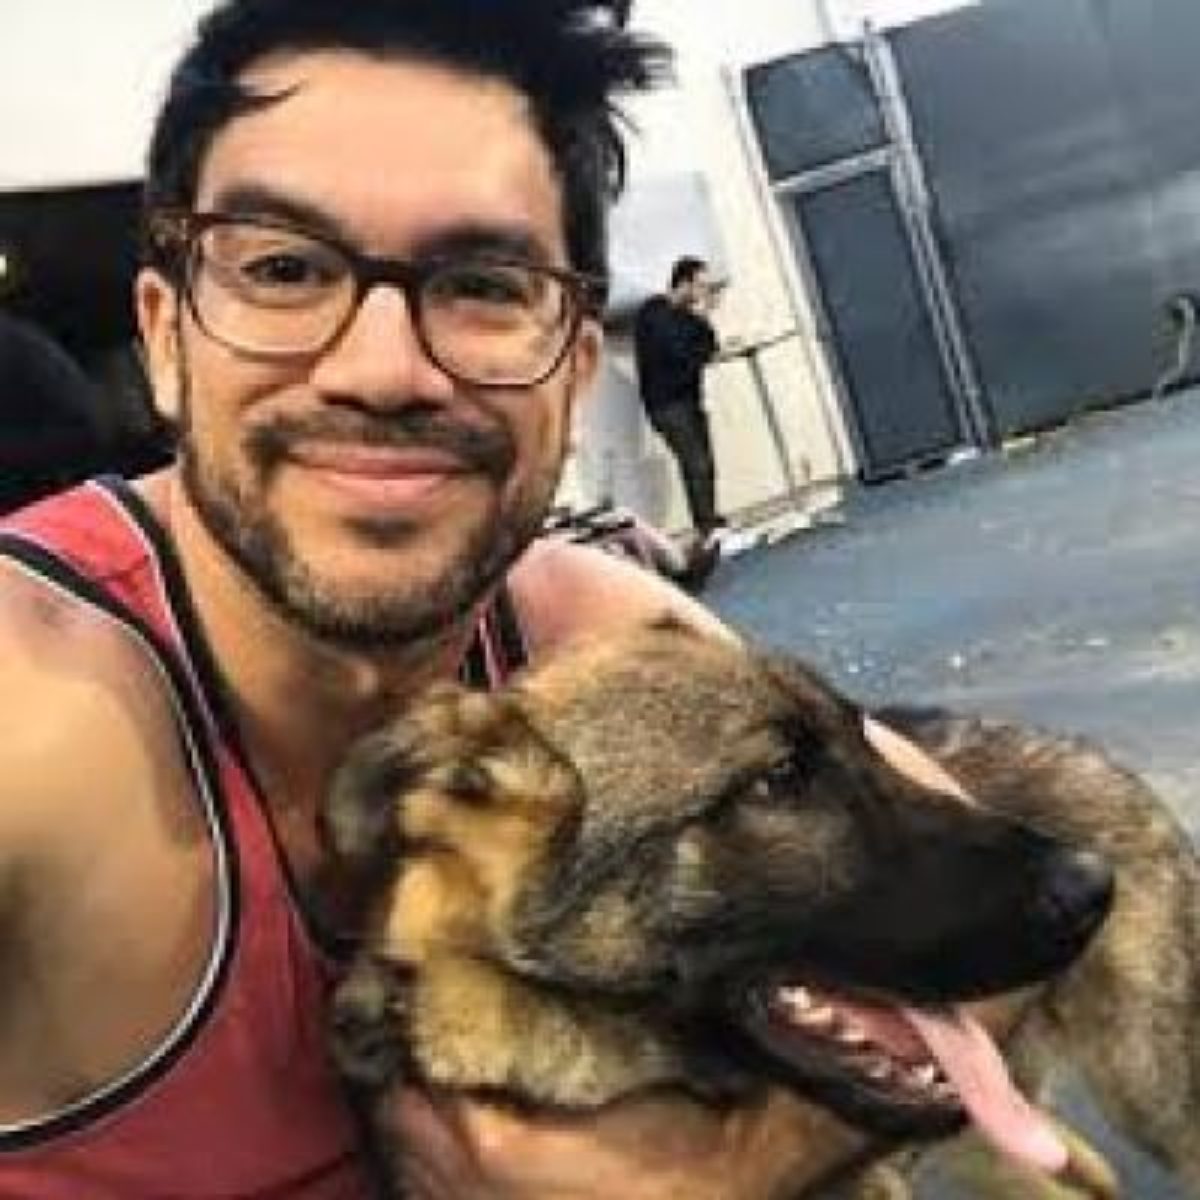 Who is tai lopez